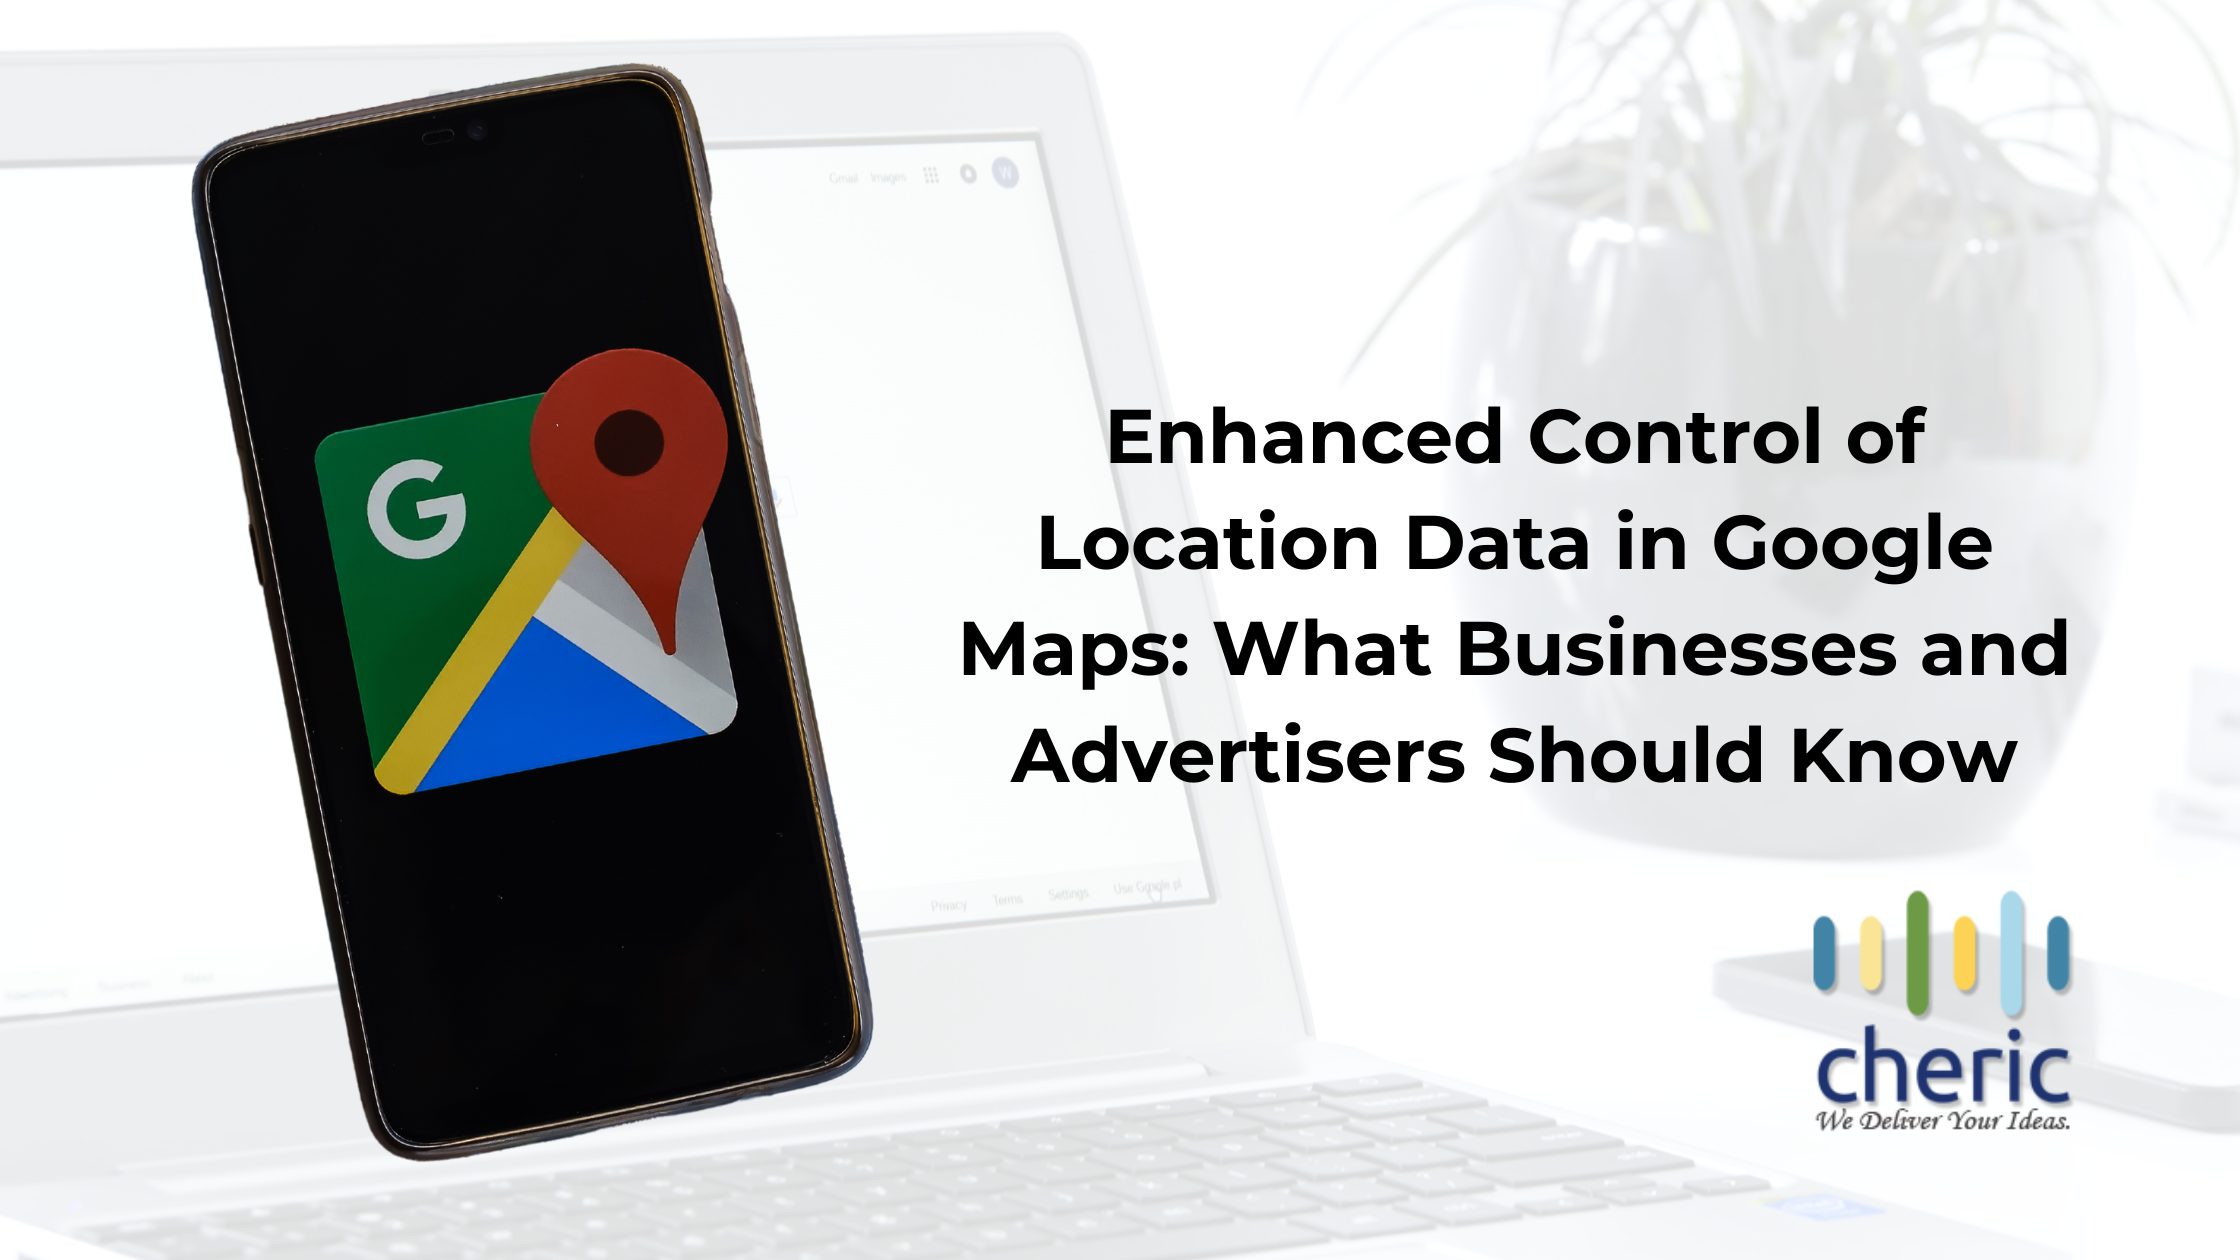 Enhanced Control of Location Data in Google Maps: What Businesses and Advertisers Should Know